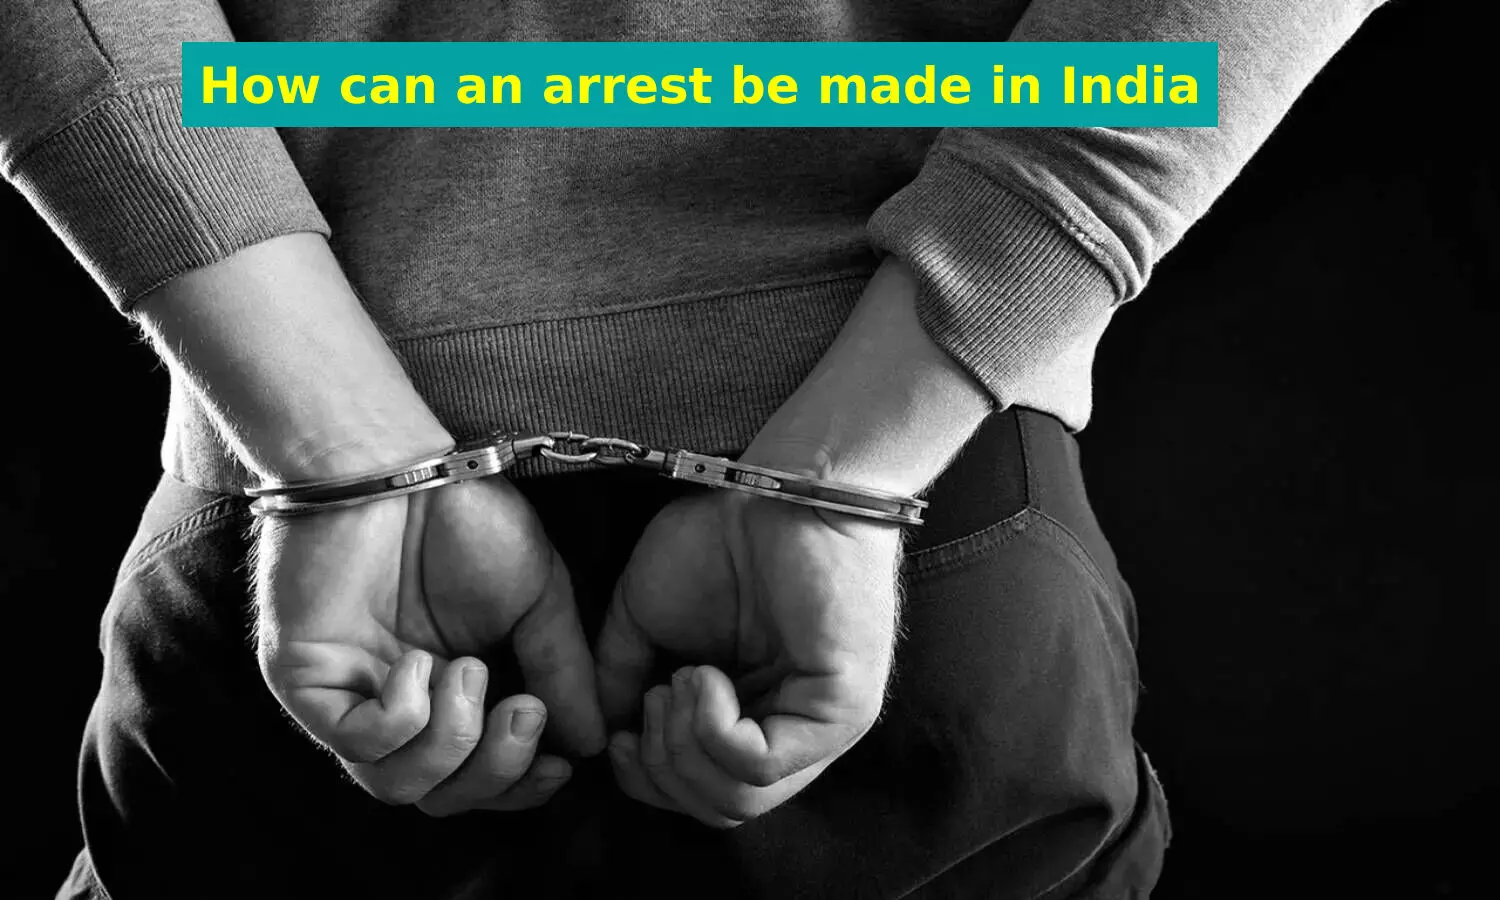 How can an arrest be made in India?